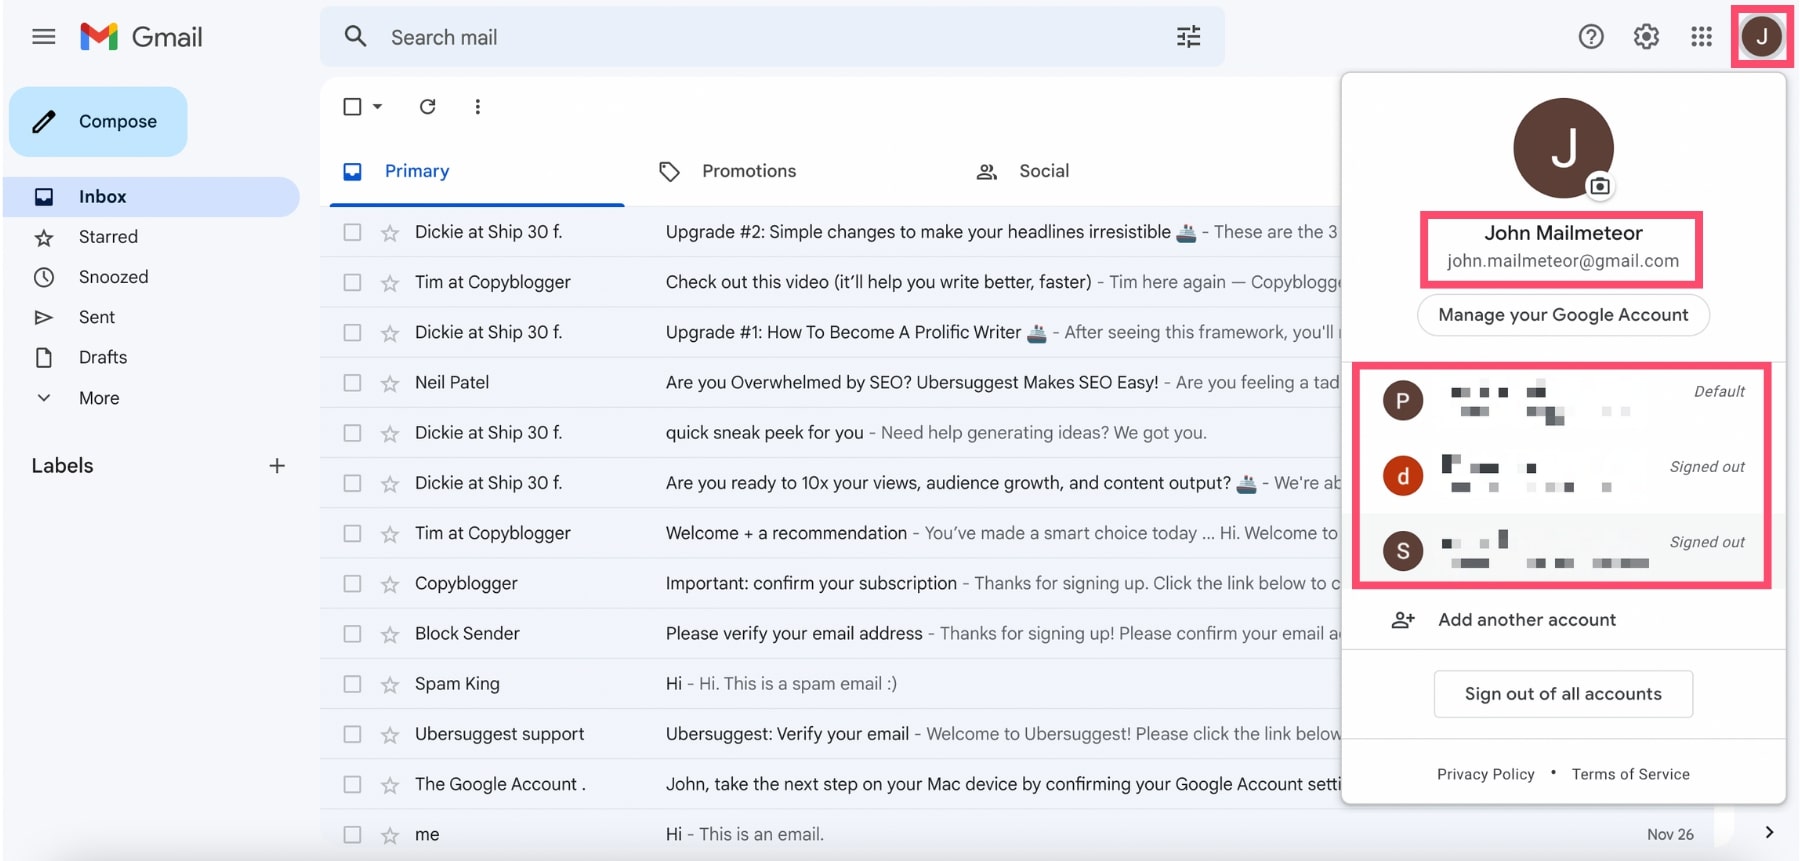 How to navigate between multiple Gmail accounts